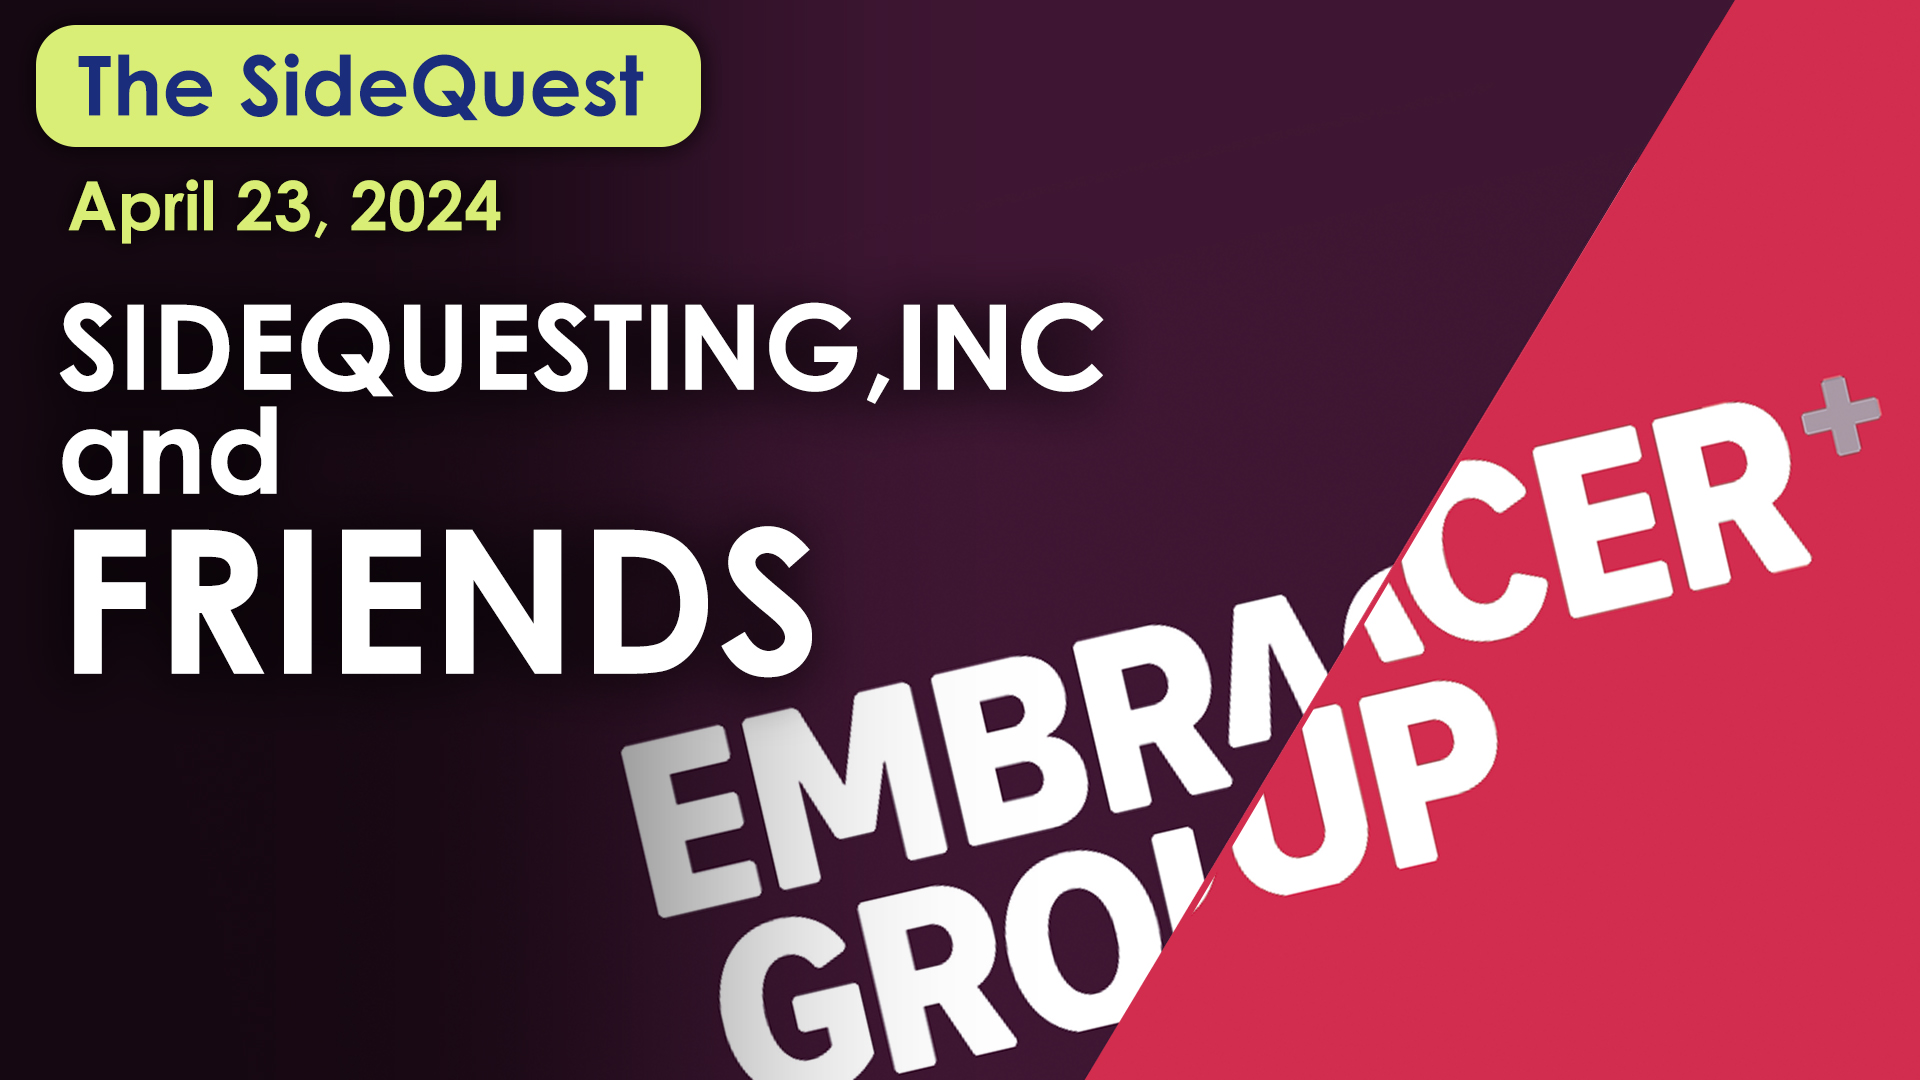 The SideQuest LIVE! April 23, 2024: SideQuesting Inc and Friends